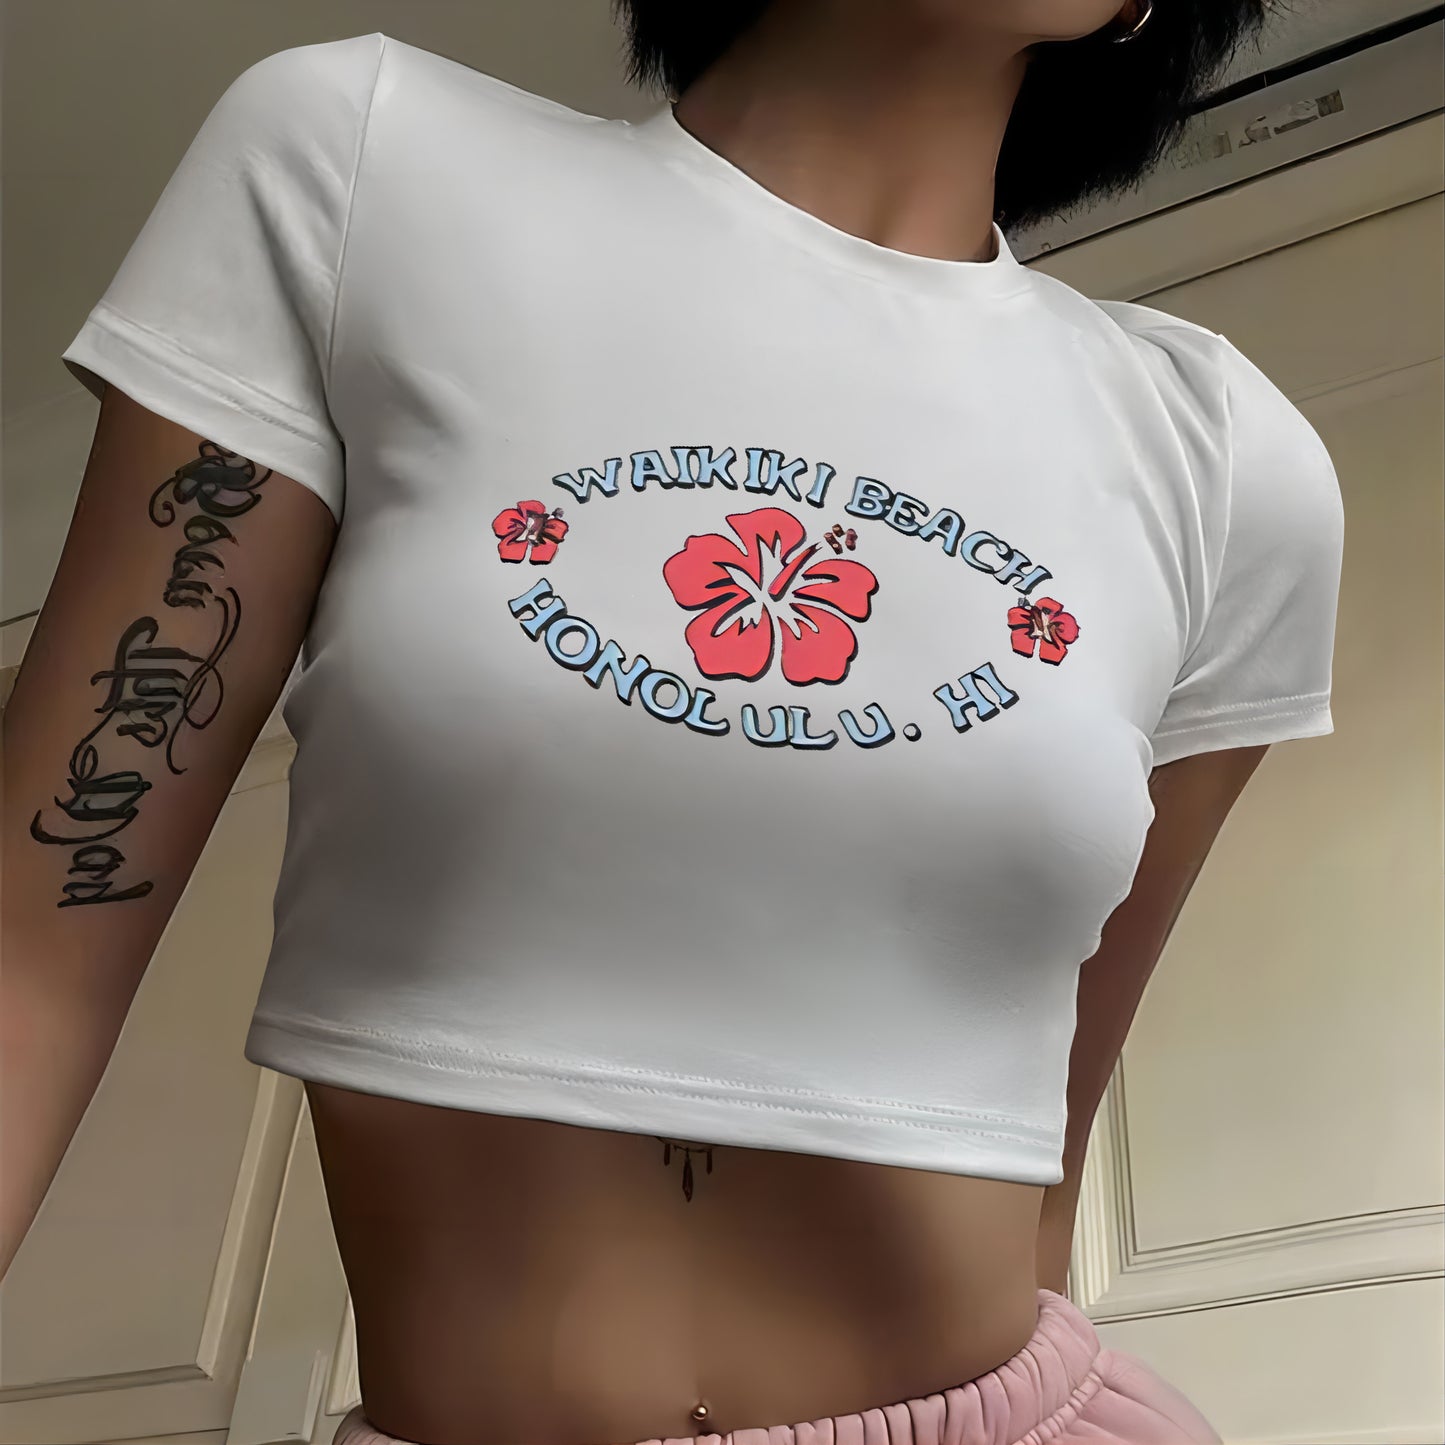 floral letter print cropped T-shirtSlogan Graphic Print Baby Tee, Y2K Crop Top, Women Girls Cool Street Fashion Short Sleeve Tee